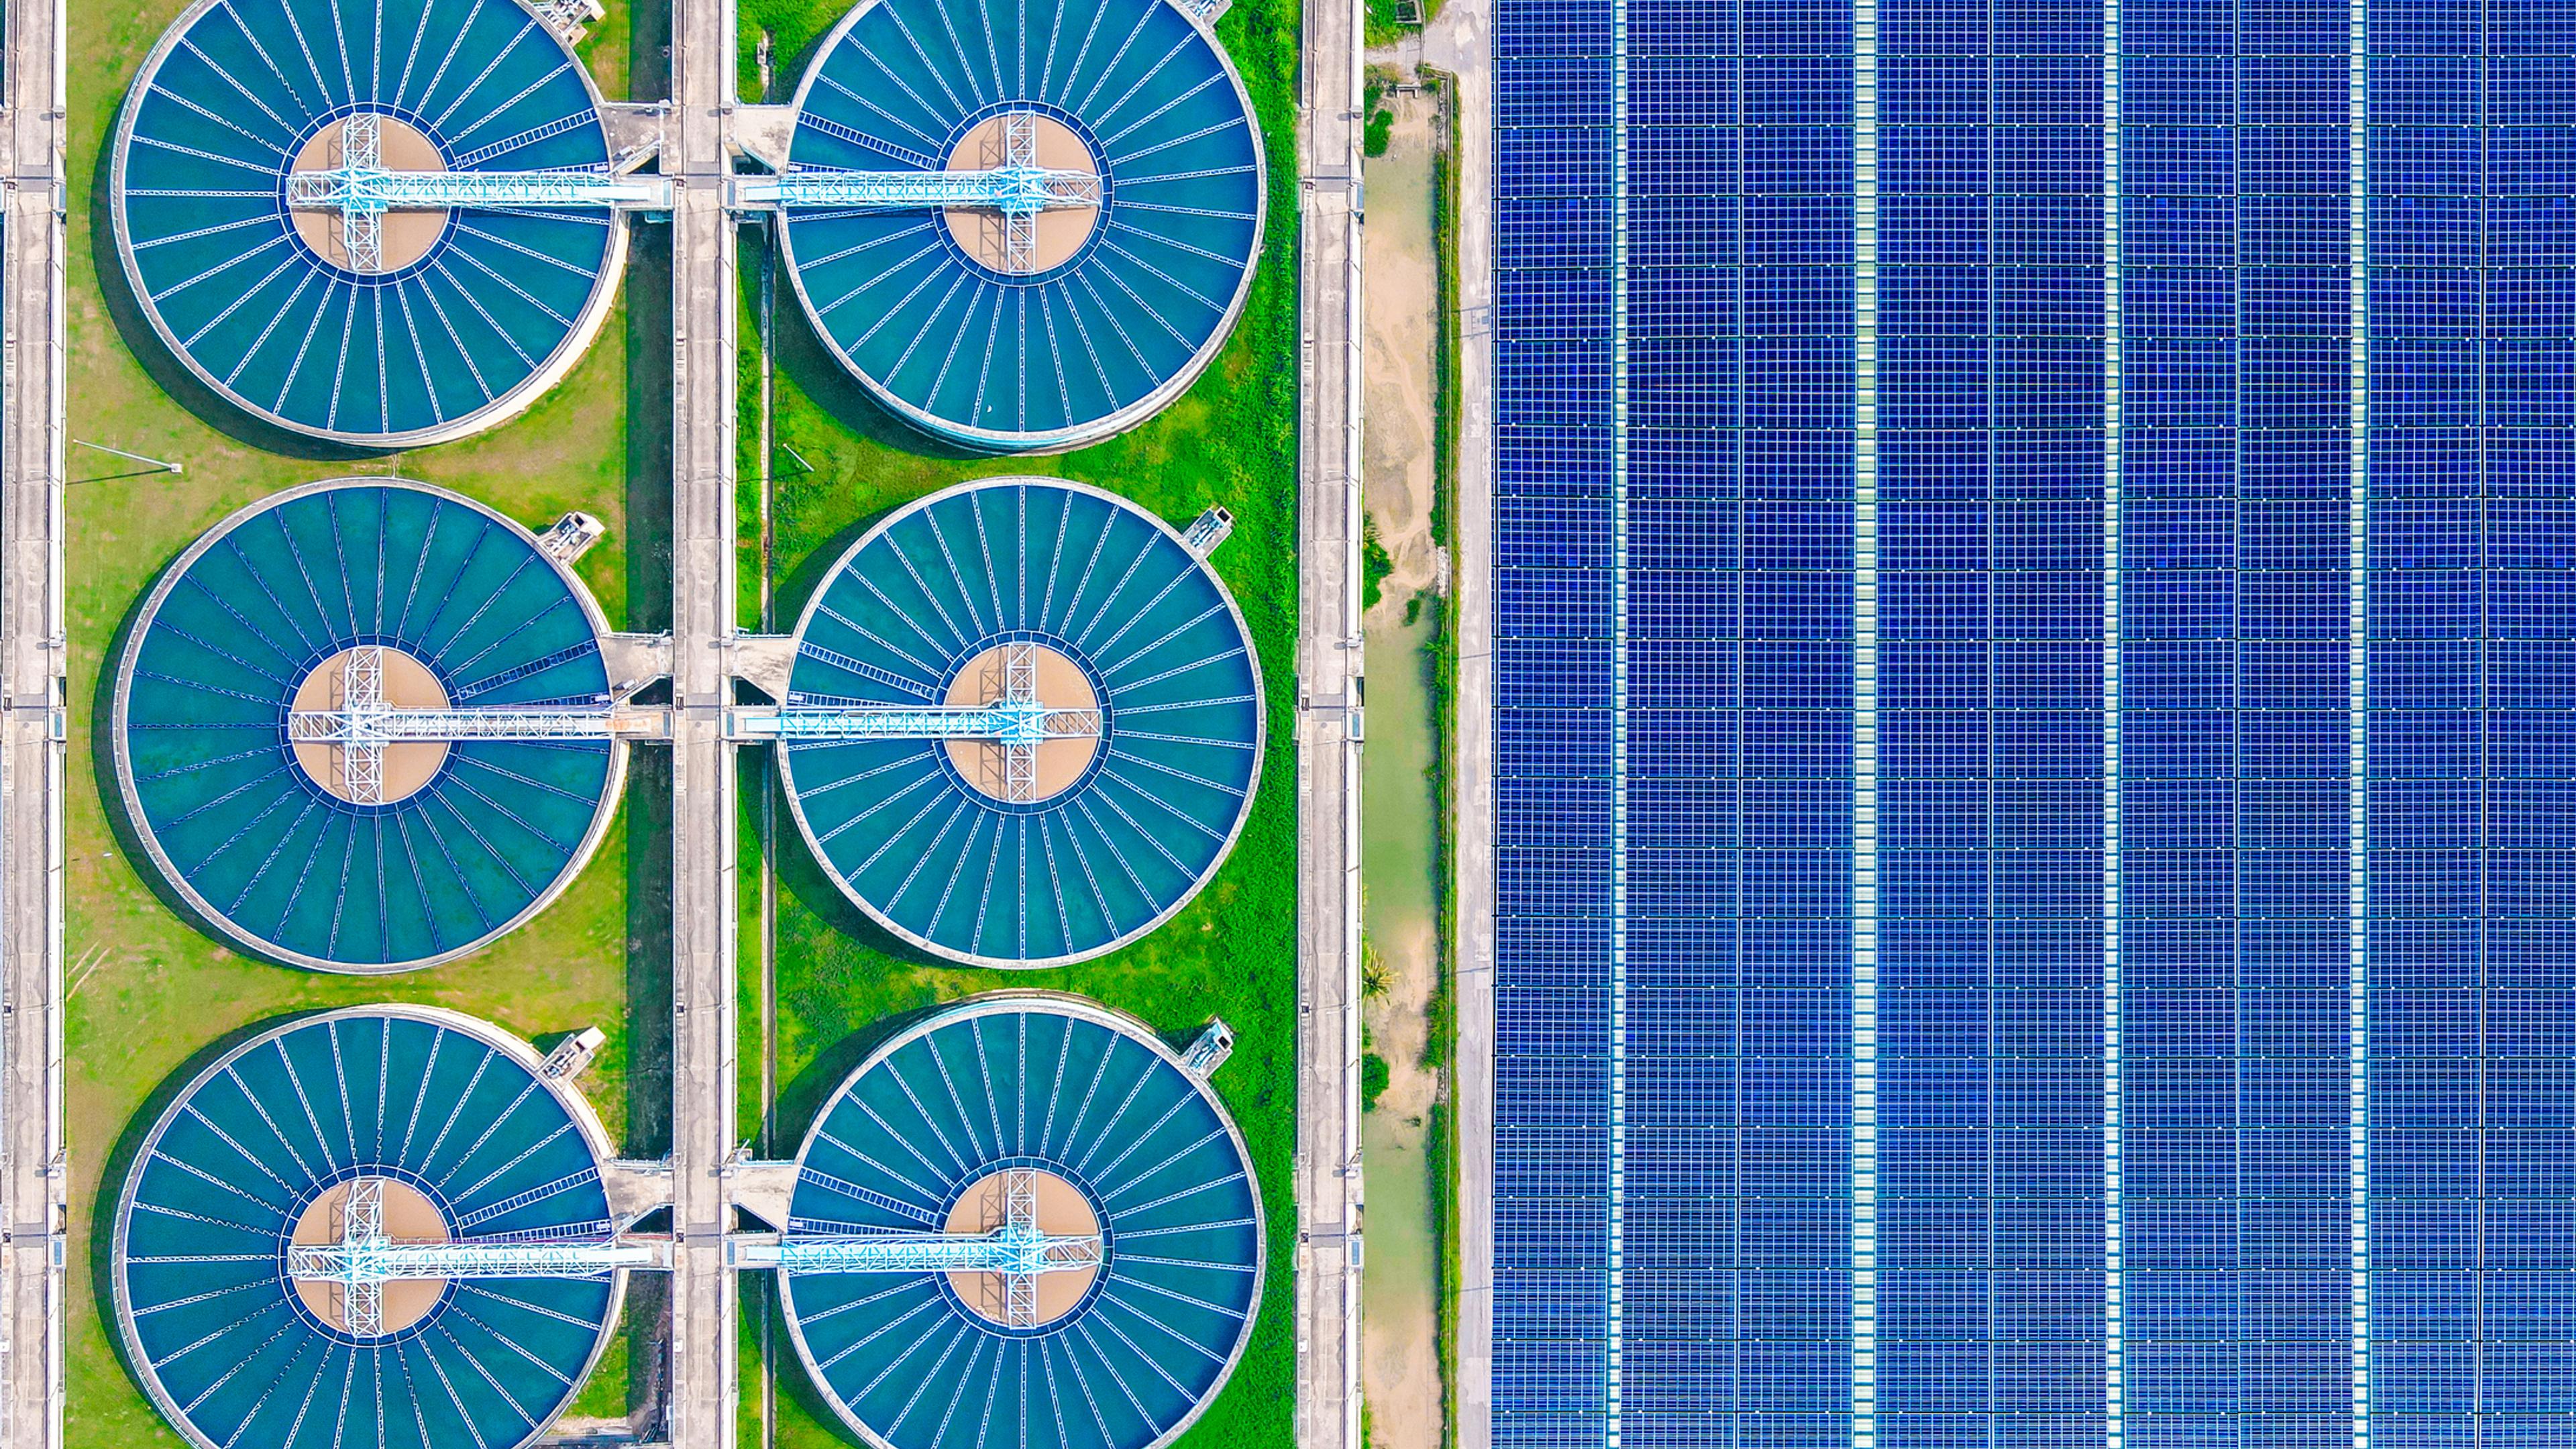 Aerial view of solar cells near a wastewater treatment pond